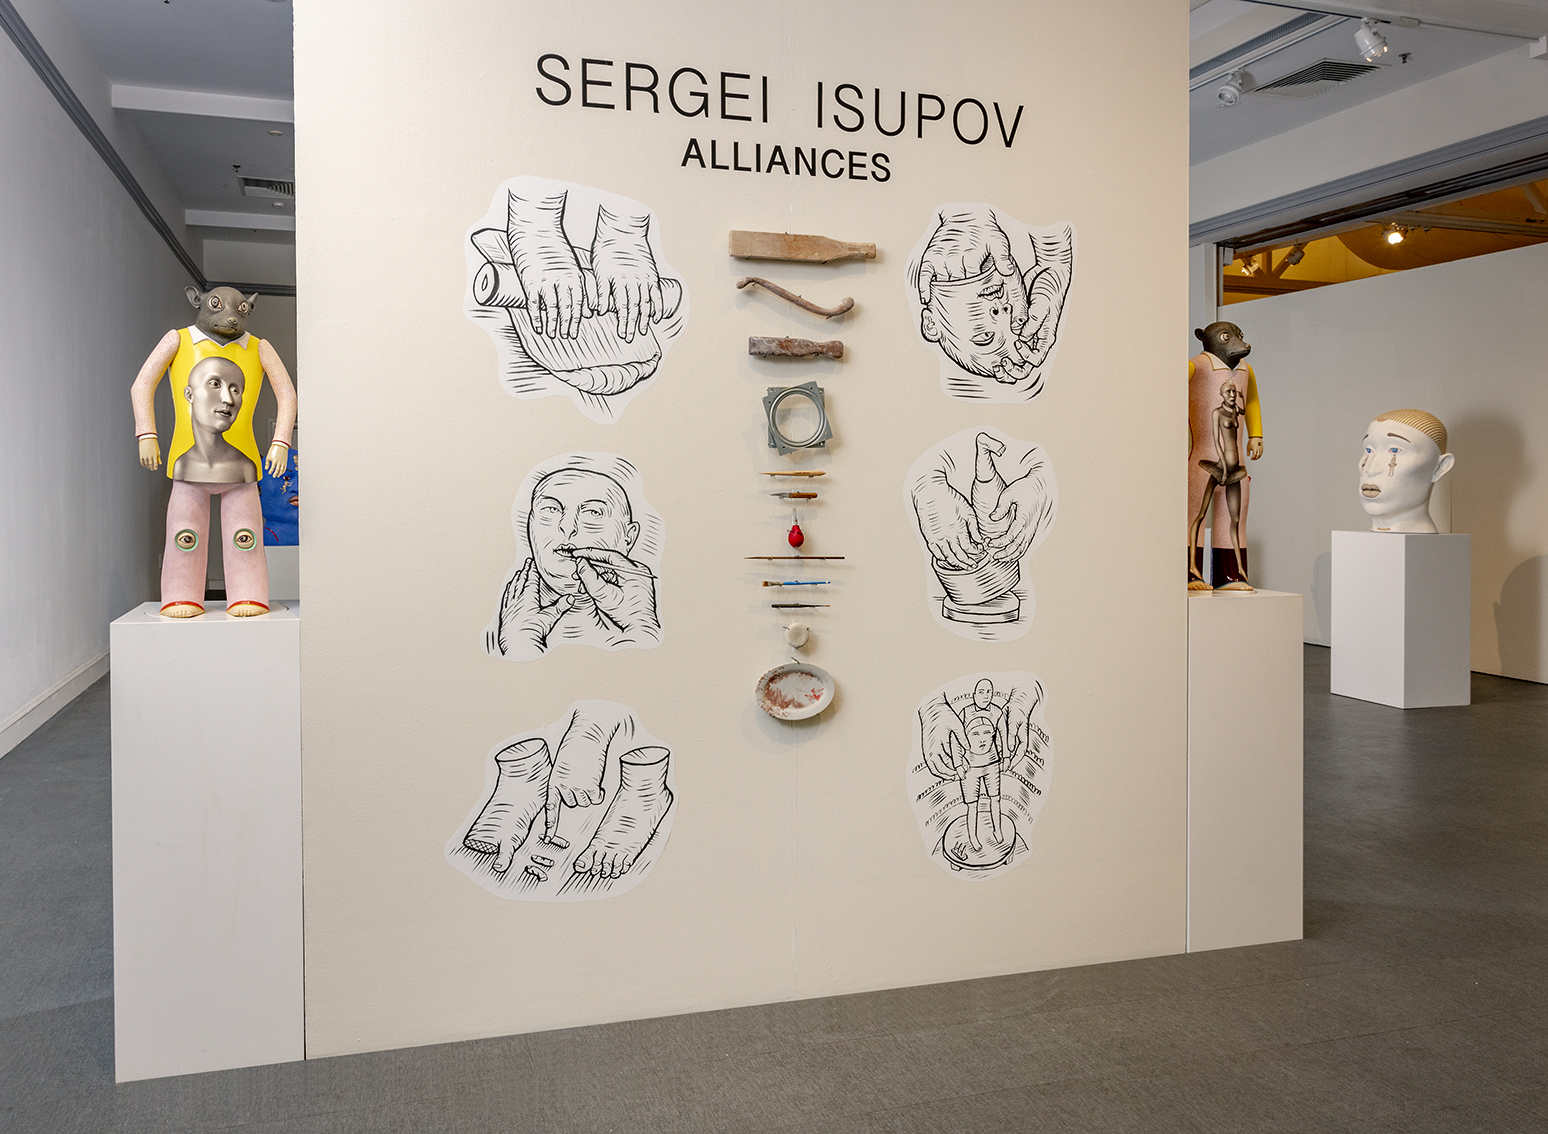 Installation Title Wall, featuring the artist's tools and drawings from Sergei Isupov's "Lips, Eyes, Ear, Eyebrow" and works in progress drawing series. Sculptures include "Crazy", "Duel" (2006), and "Midnight Son" (2009). Photo by John Polak Photography.</p>
<p>"SERGEI ISUPOV: Alliances", Exhibition Installation at Thorne-Sagendorph Art Gallery, Keene State College, Keene, NH, October 25-December 6, 2023.